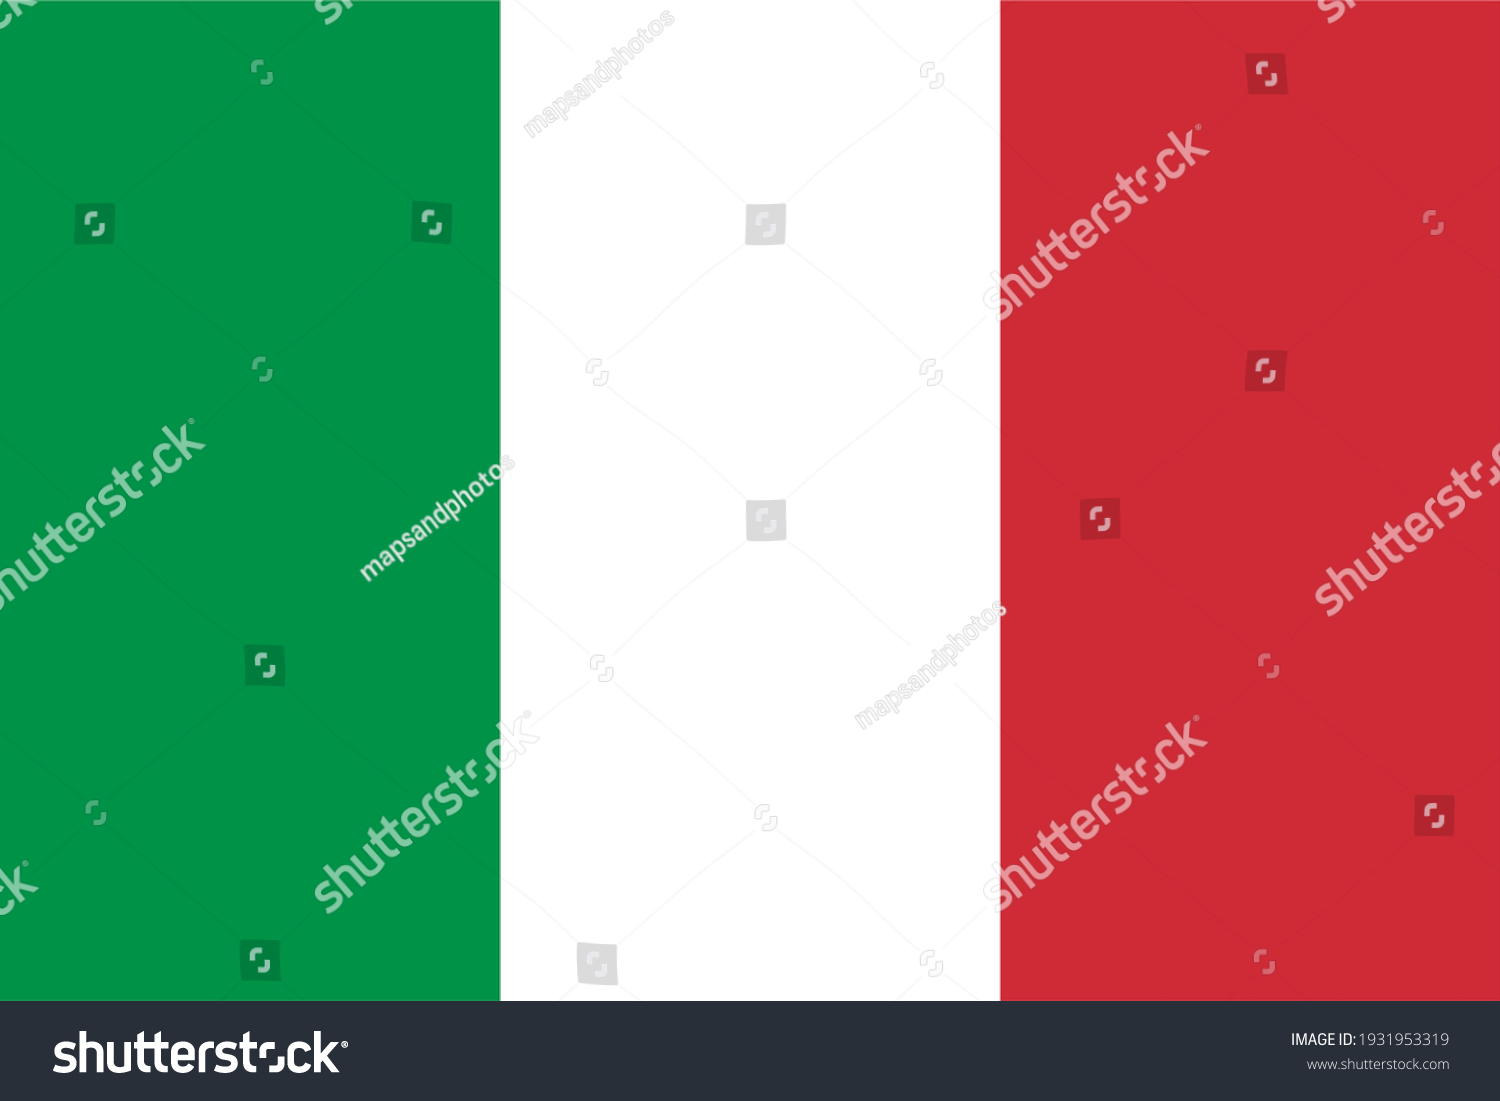 Vector flag of Italy. Accurate dimensions and official colors. Symbol of patriotism and freedom. This file is suitable for digital editing and printing of any size. #1931953319